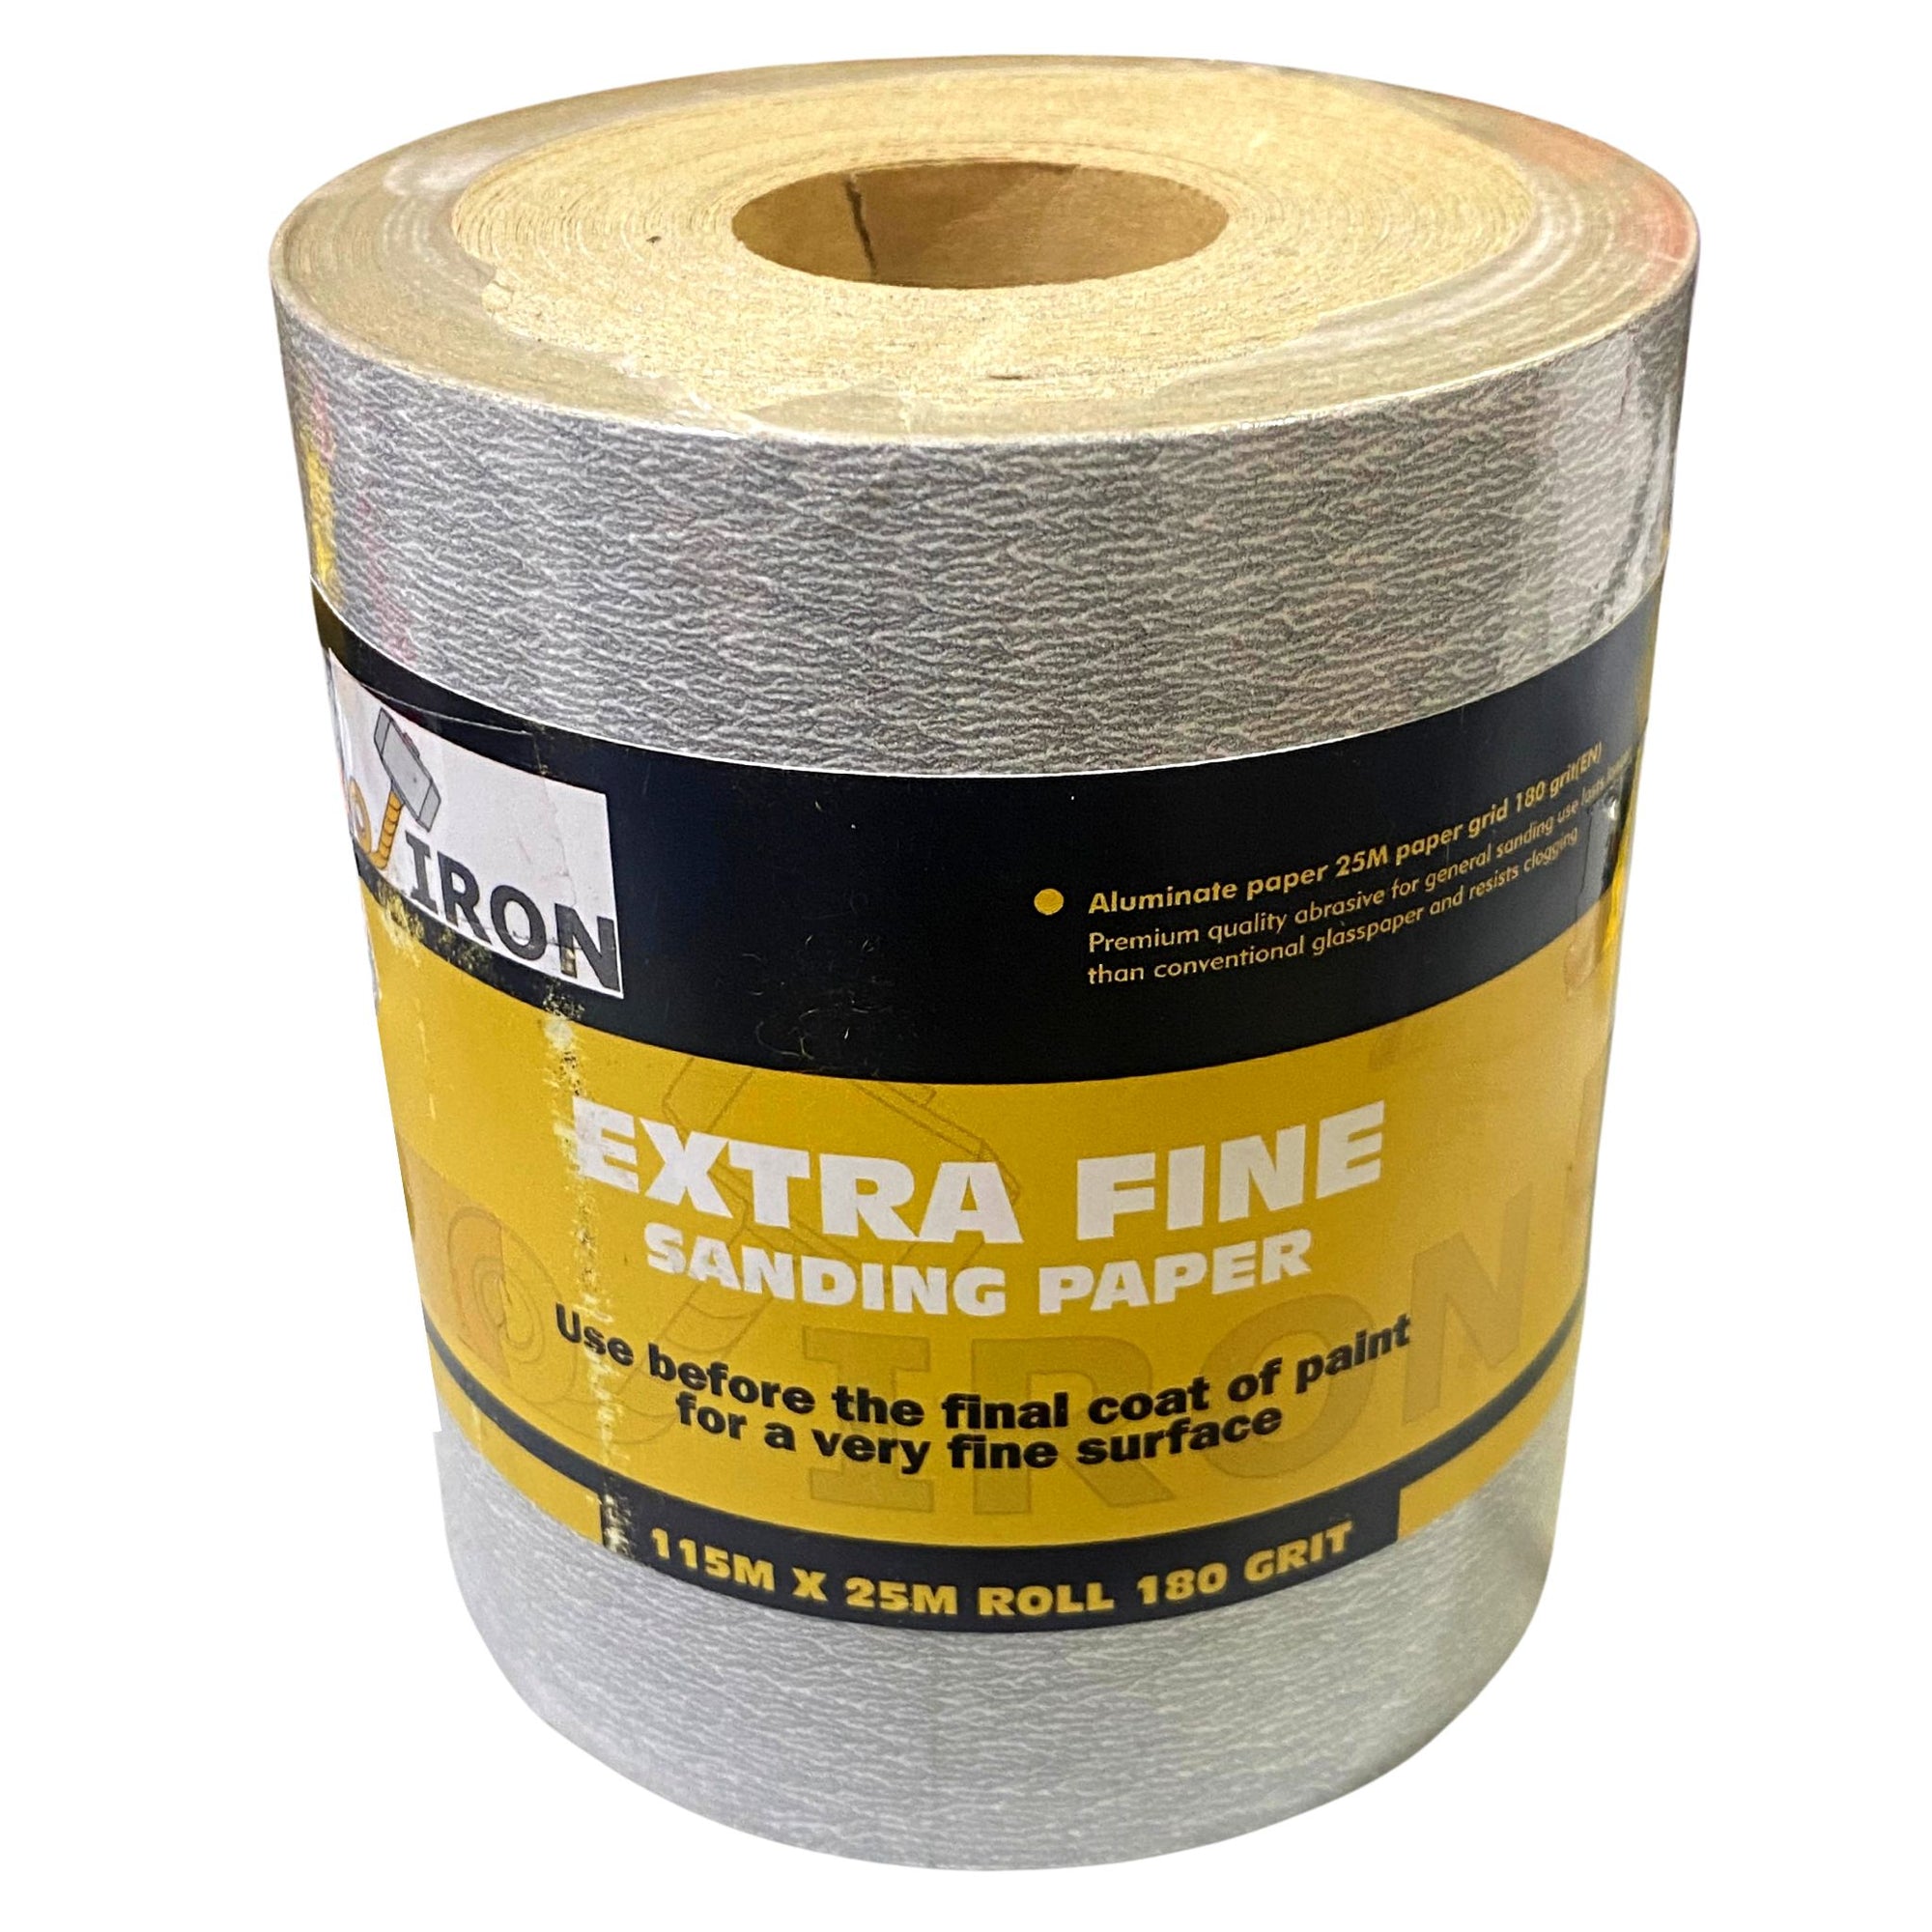 Painters SANDPAPER ROLL 115MM X 25M | 180 GRIT - South East Clearance Centre